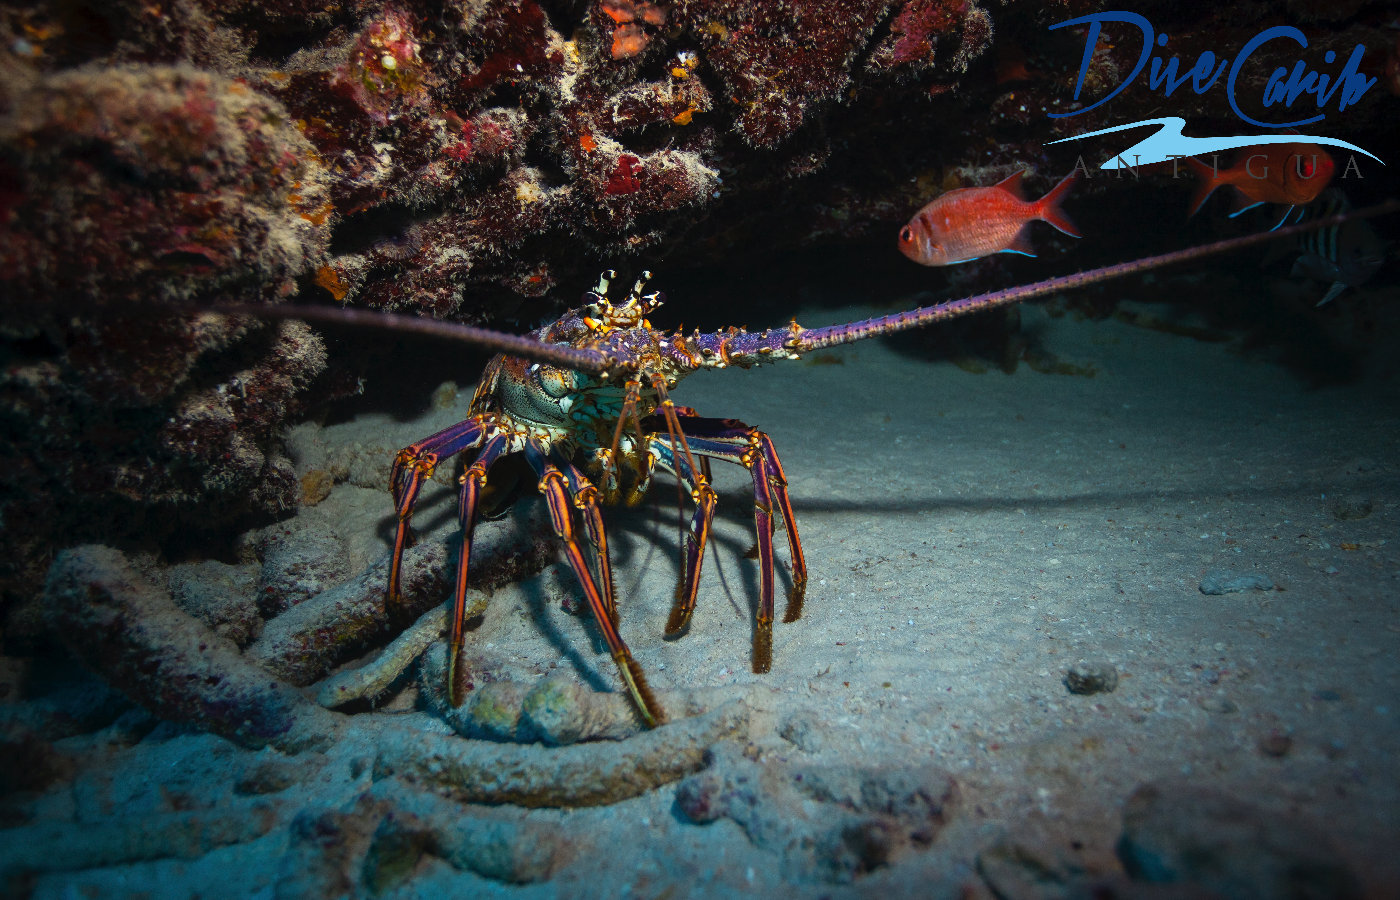 One of the many beautiful Caribbean spiny lobsters (Panulirus argus) that we see on our dives. 
These spiny lobsters are particularly important to the fishing industry of Antigua and Barbuda, however there is a closed season from the 1st of May - 30th of June. It is also illegal to harm, take, have in possession, place for sale, or purchase them when they are undersized, carrying eggs, molting, or have a tar spot. 
We hope this fisheries can be sustainable for years to come.
#lobster #caribbeanspinylobster #spinylobster #antigua #antiguaandbarbuda #scuba #scubadiving #padi #divecarib #econodeco #fisheries #sustainable #seafood #caribbean